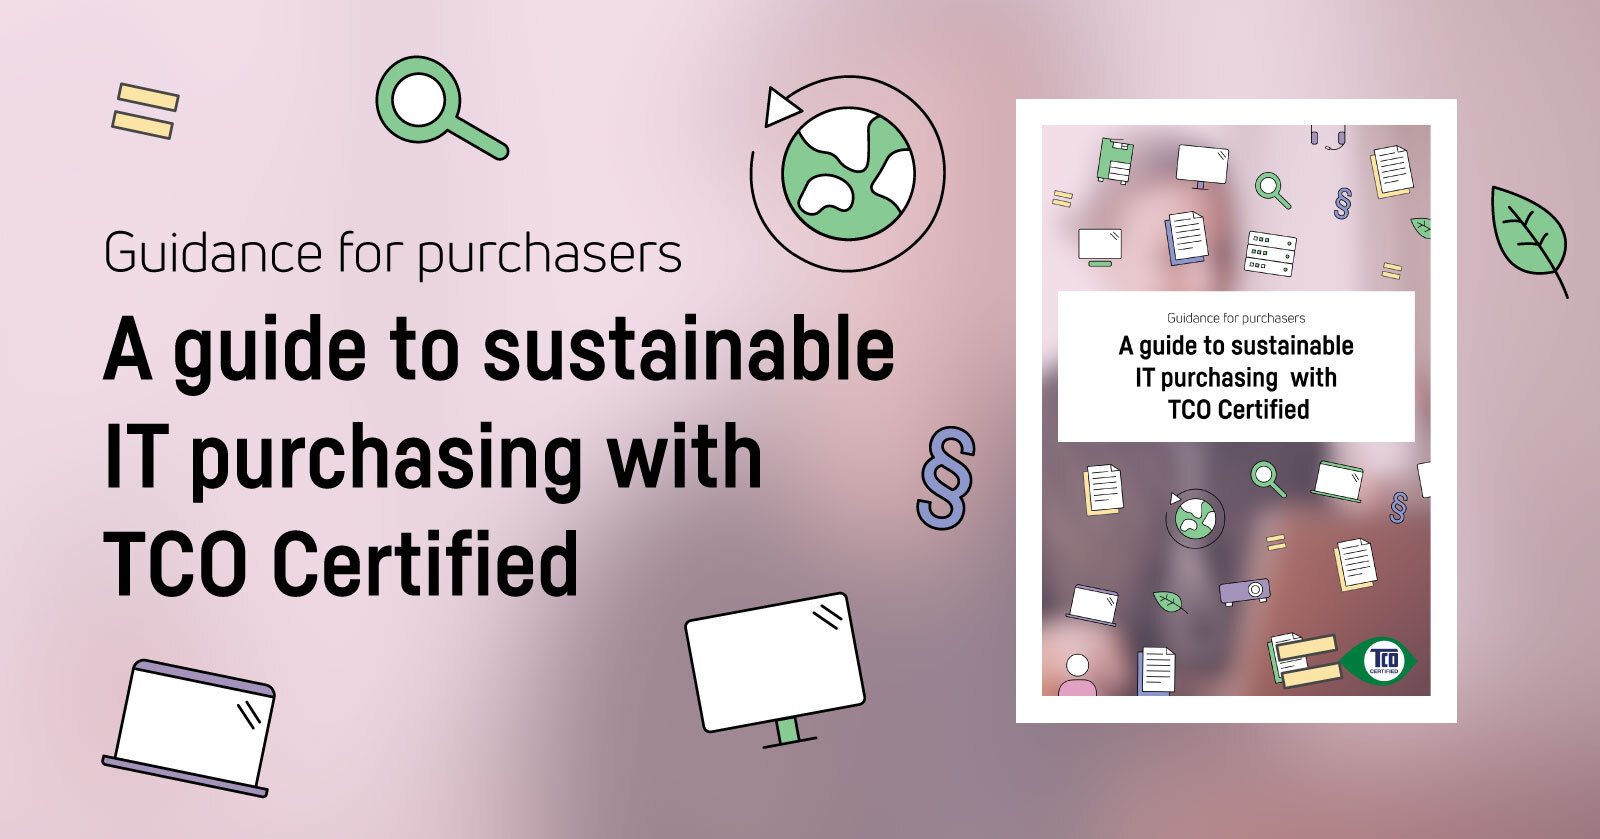 New release! Guide to sustainable IT purchasing with TCO Certified